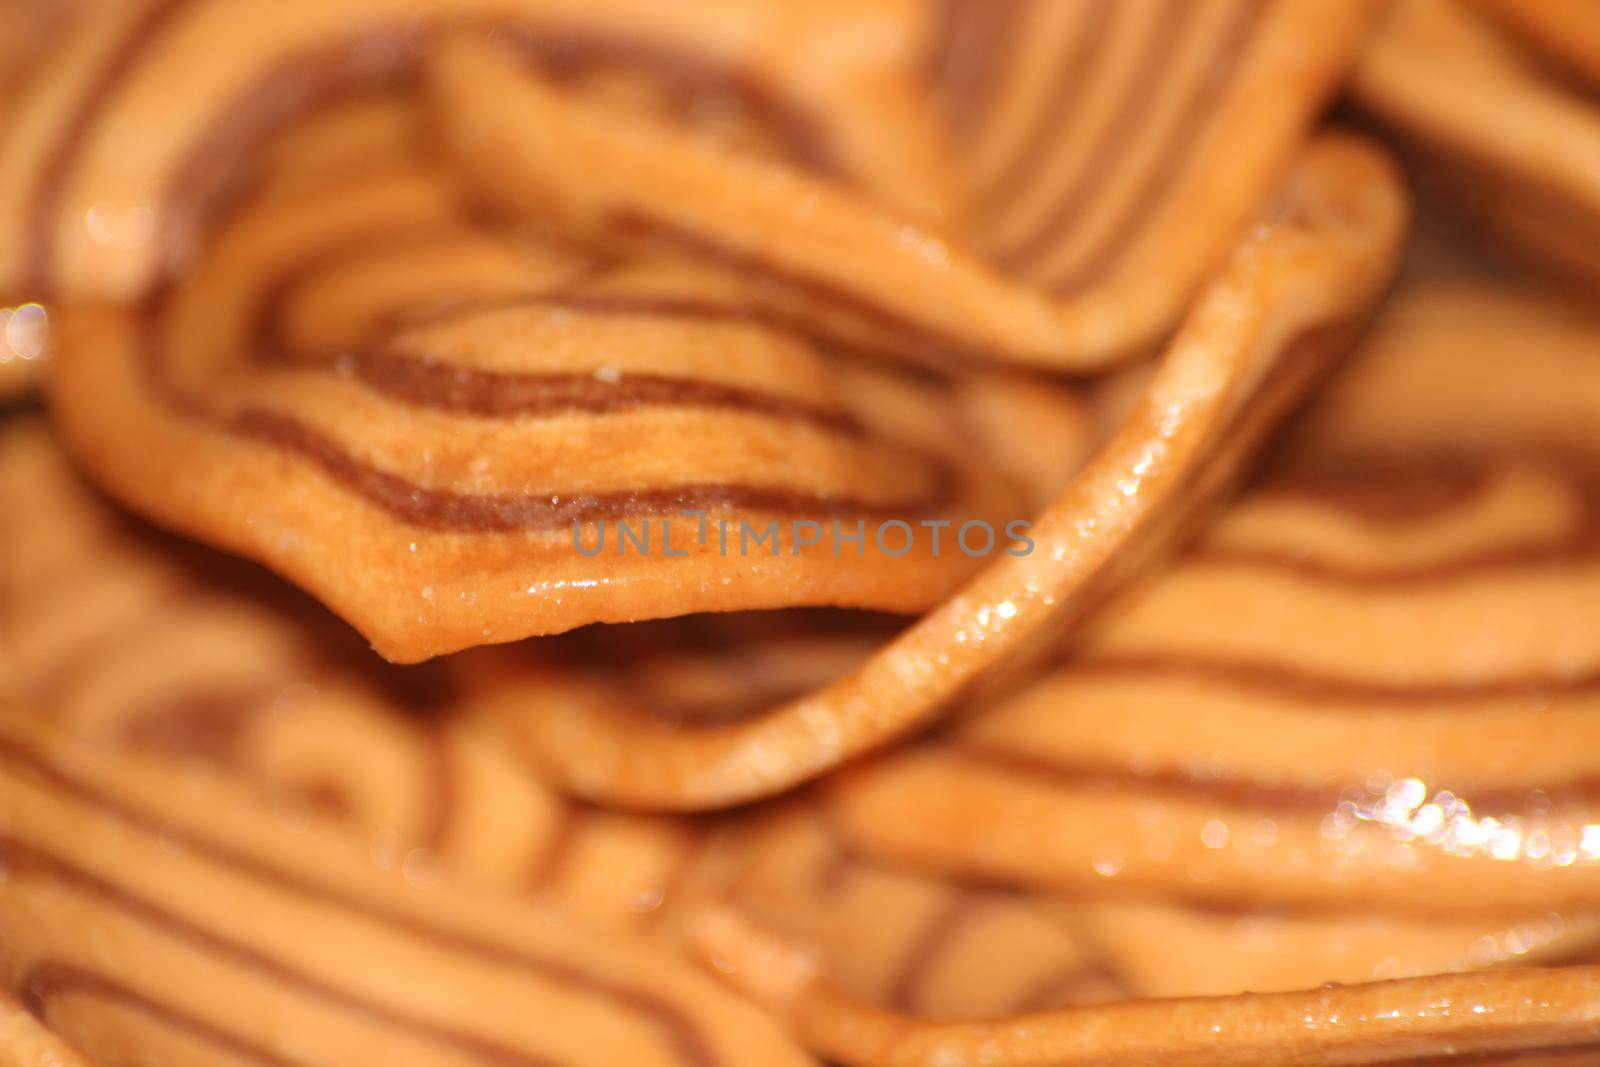 Closeup view with selective focus of a large number of round cookies with coconut filling lines.